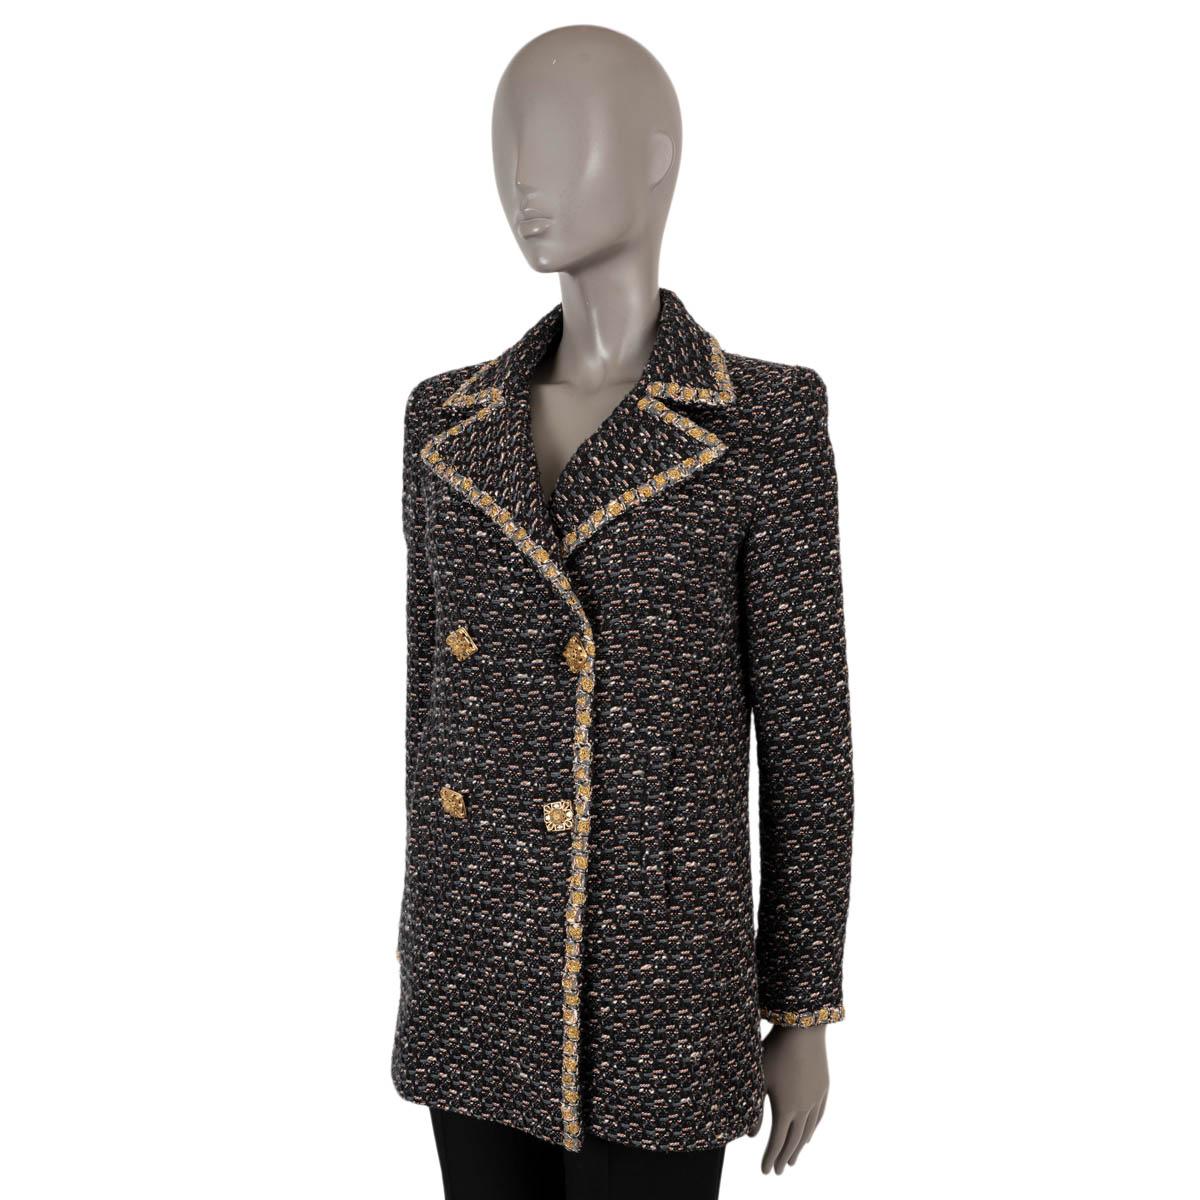 100% authentic Chanel tweed peacoat jacket in black, grey, white and orange tweed wool (69%), polyamide (20%) and cotton (11%). The design features four stone embellished gold-tone buttons, one on each cuff, gold lurex braided trim and two slit